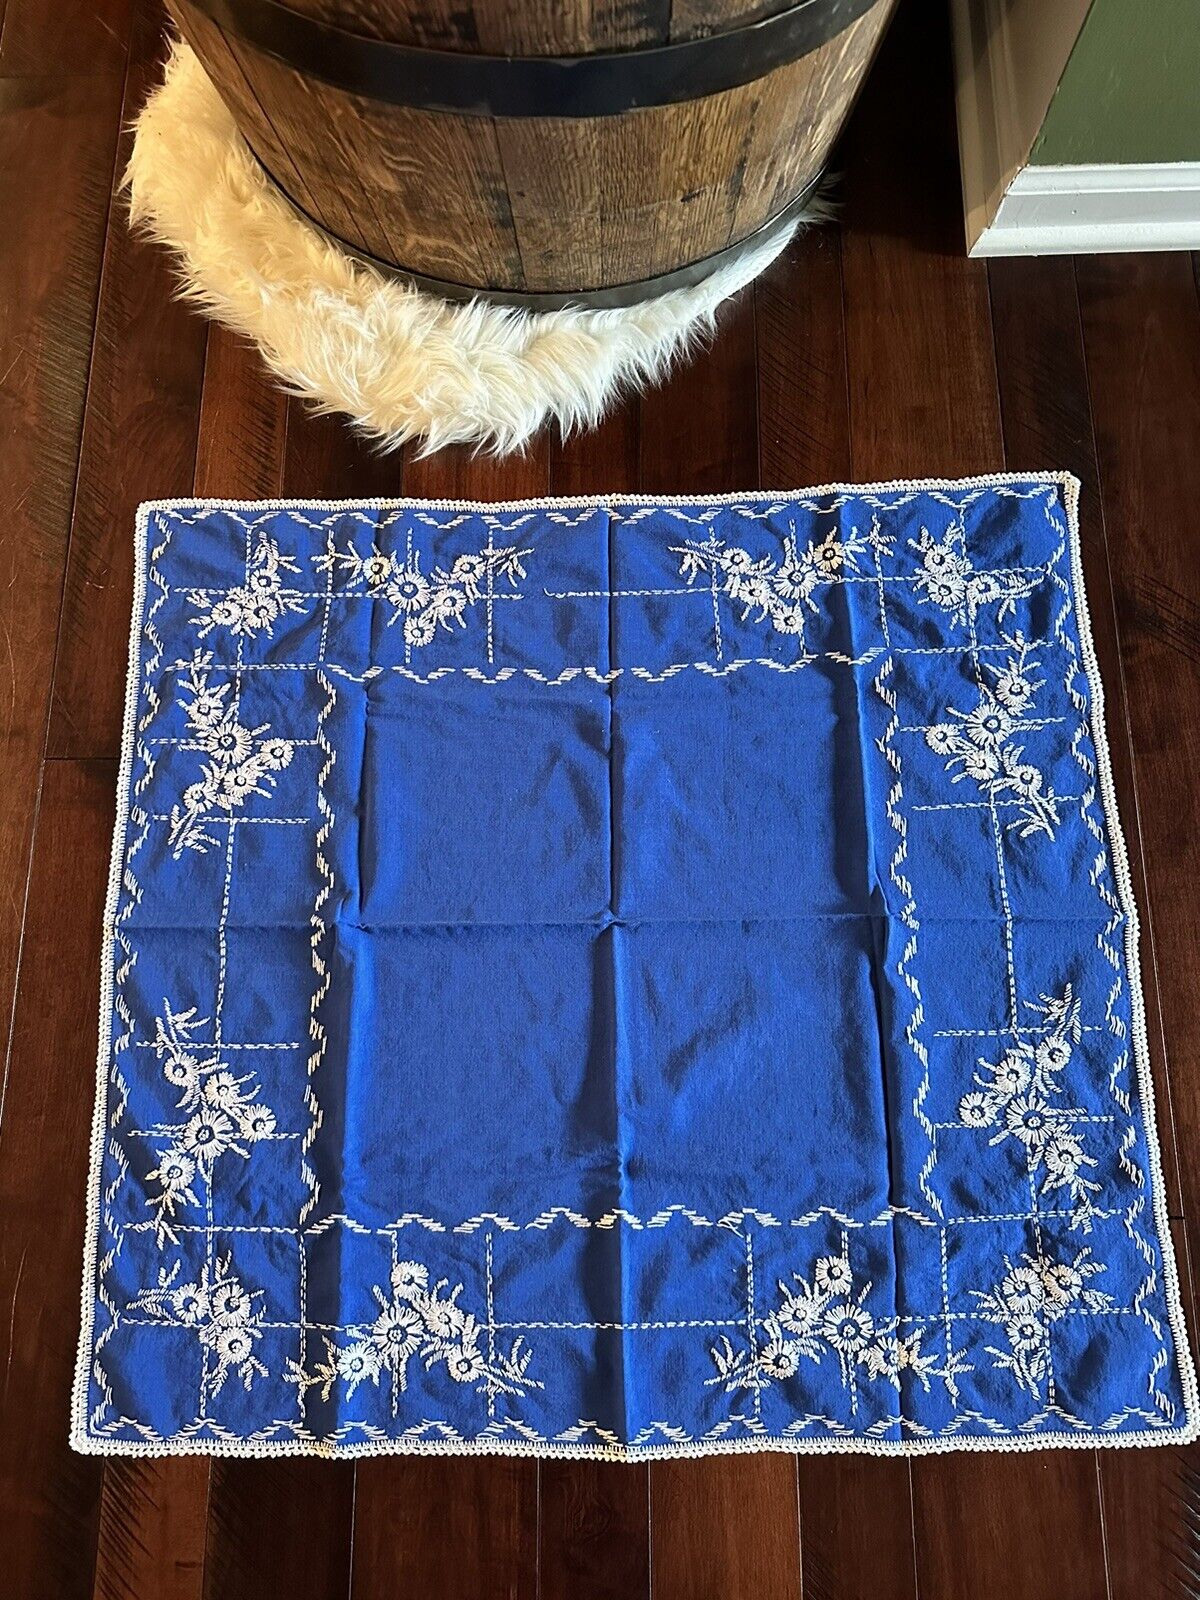 Vintage Blue Tablecloth Embroidered Square 29 X 31” Floral Cobalt Small